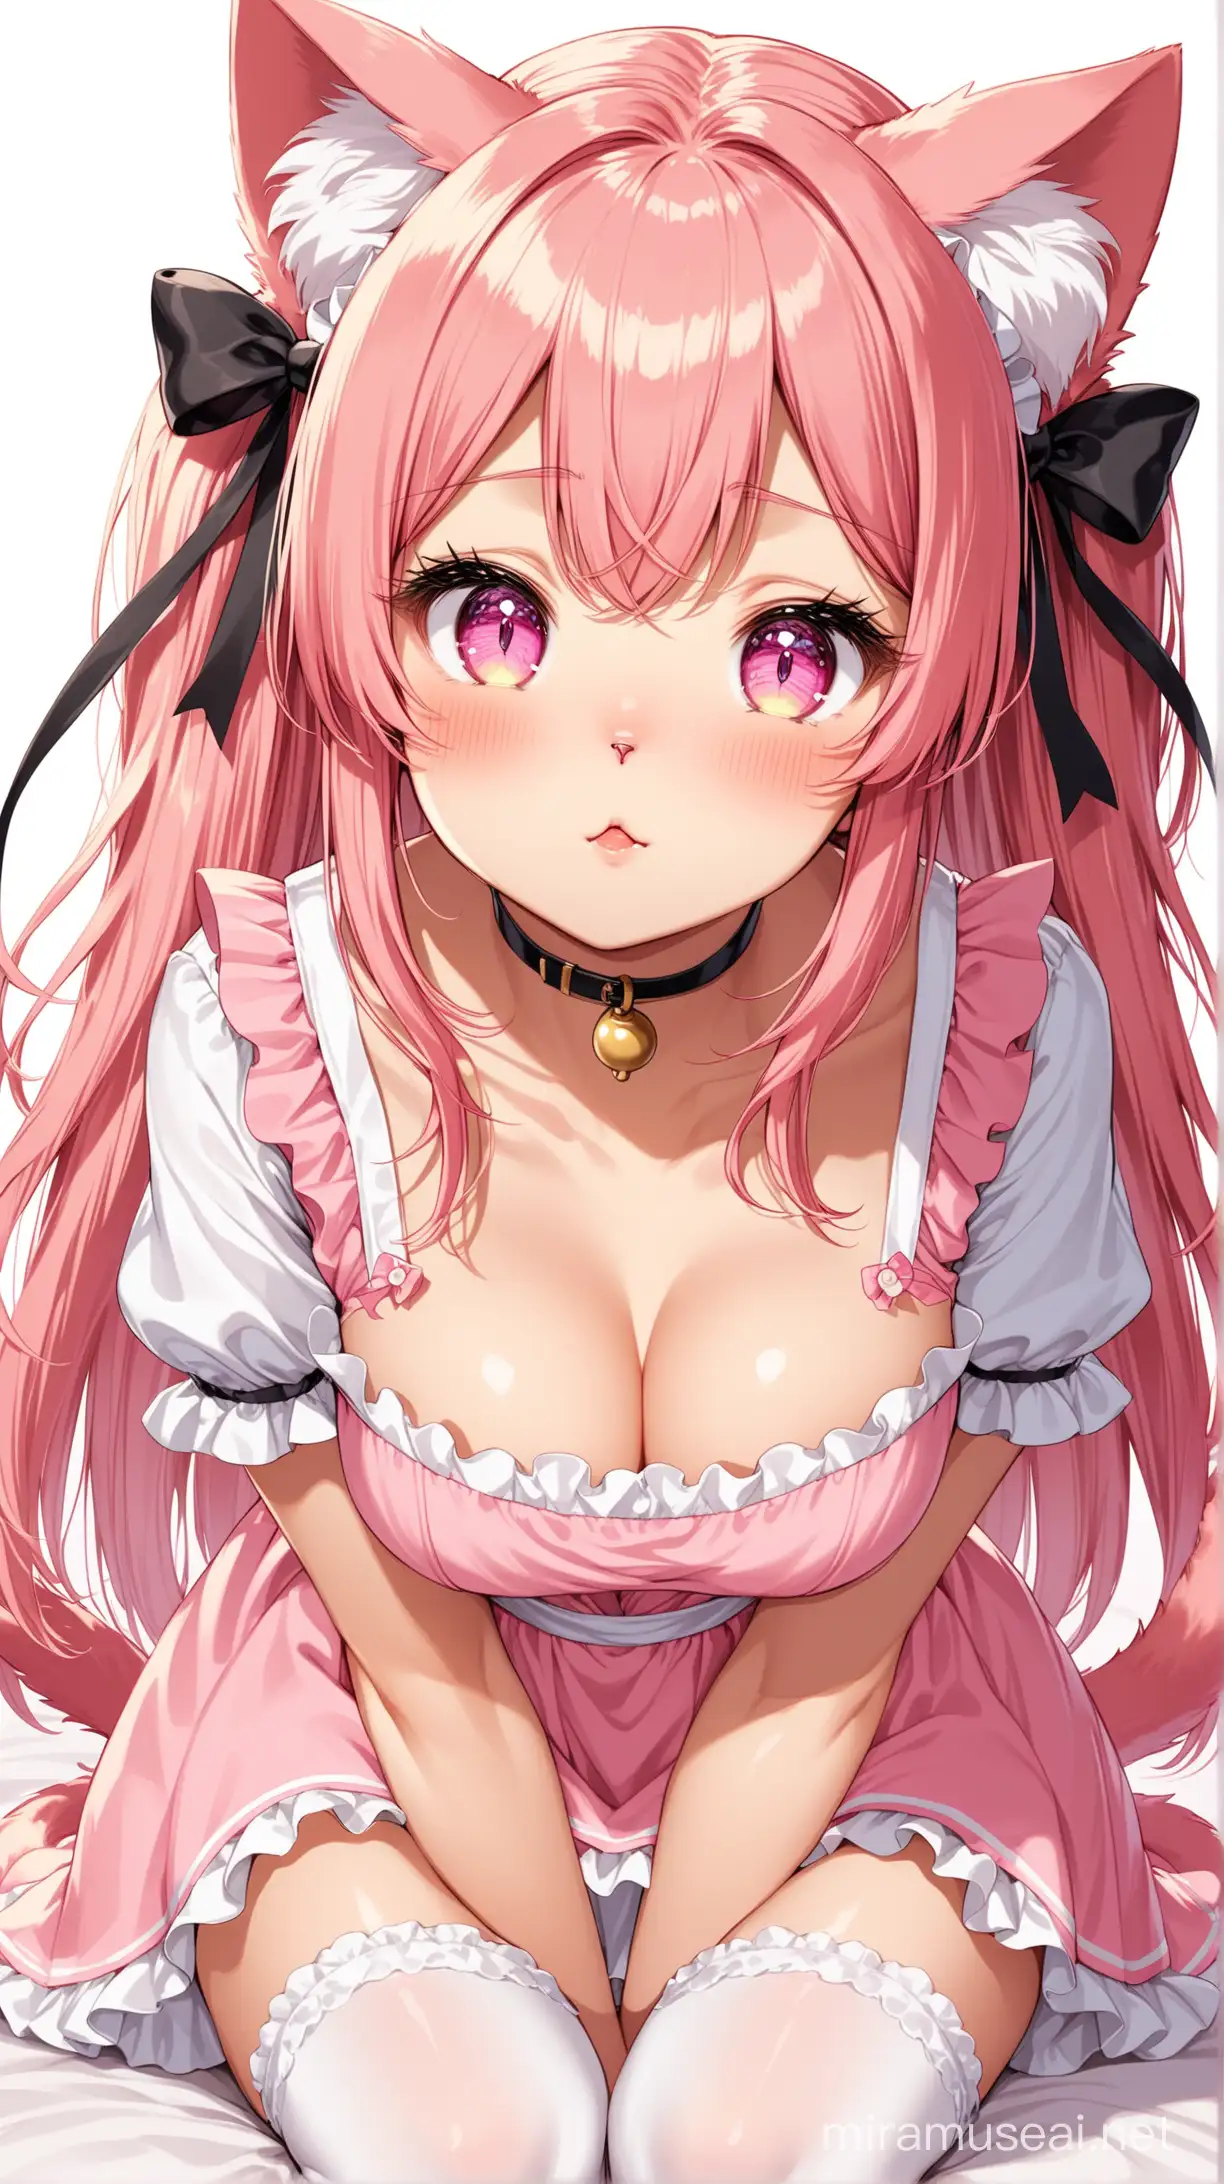 Kawaii Nyandere Cat Girl in Pink Maid Uniform Receives Headpat from Viewer